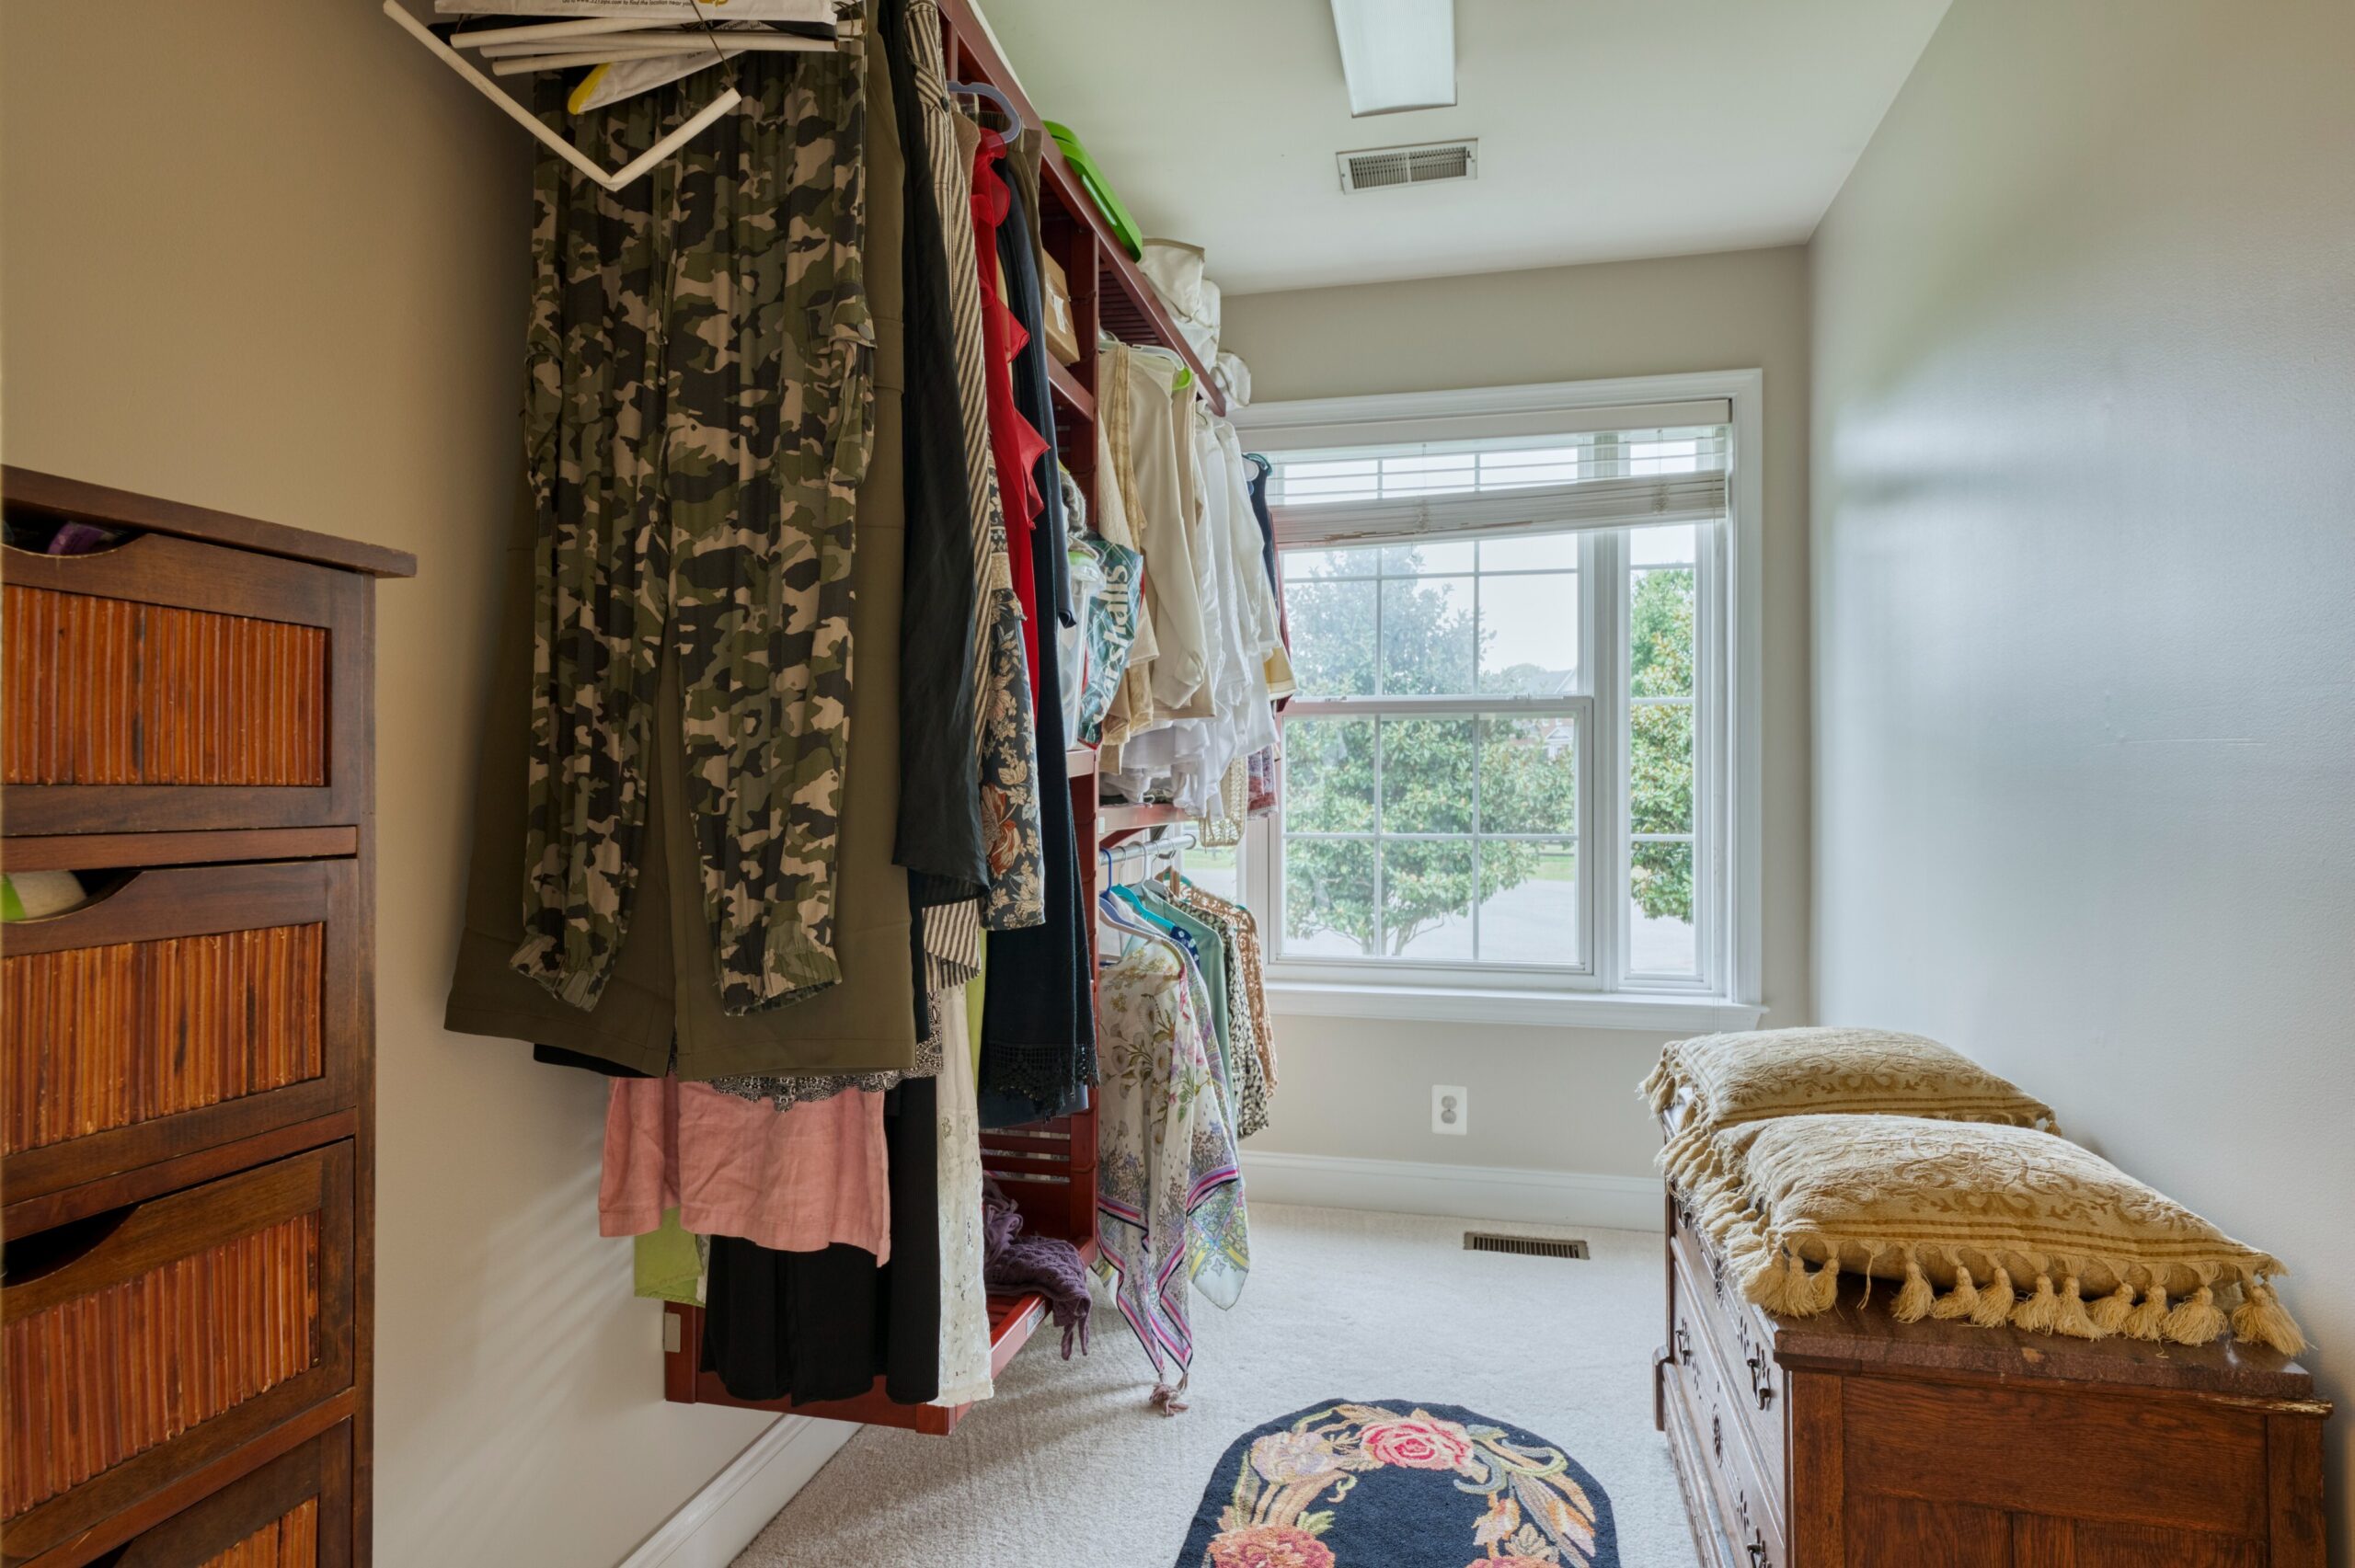 Professional interior photo of 16961 Heather Knolls Pl - showing one of the walk in closets which has a bench and also a window to the exterior